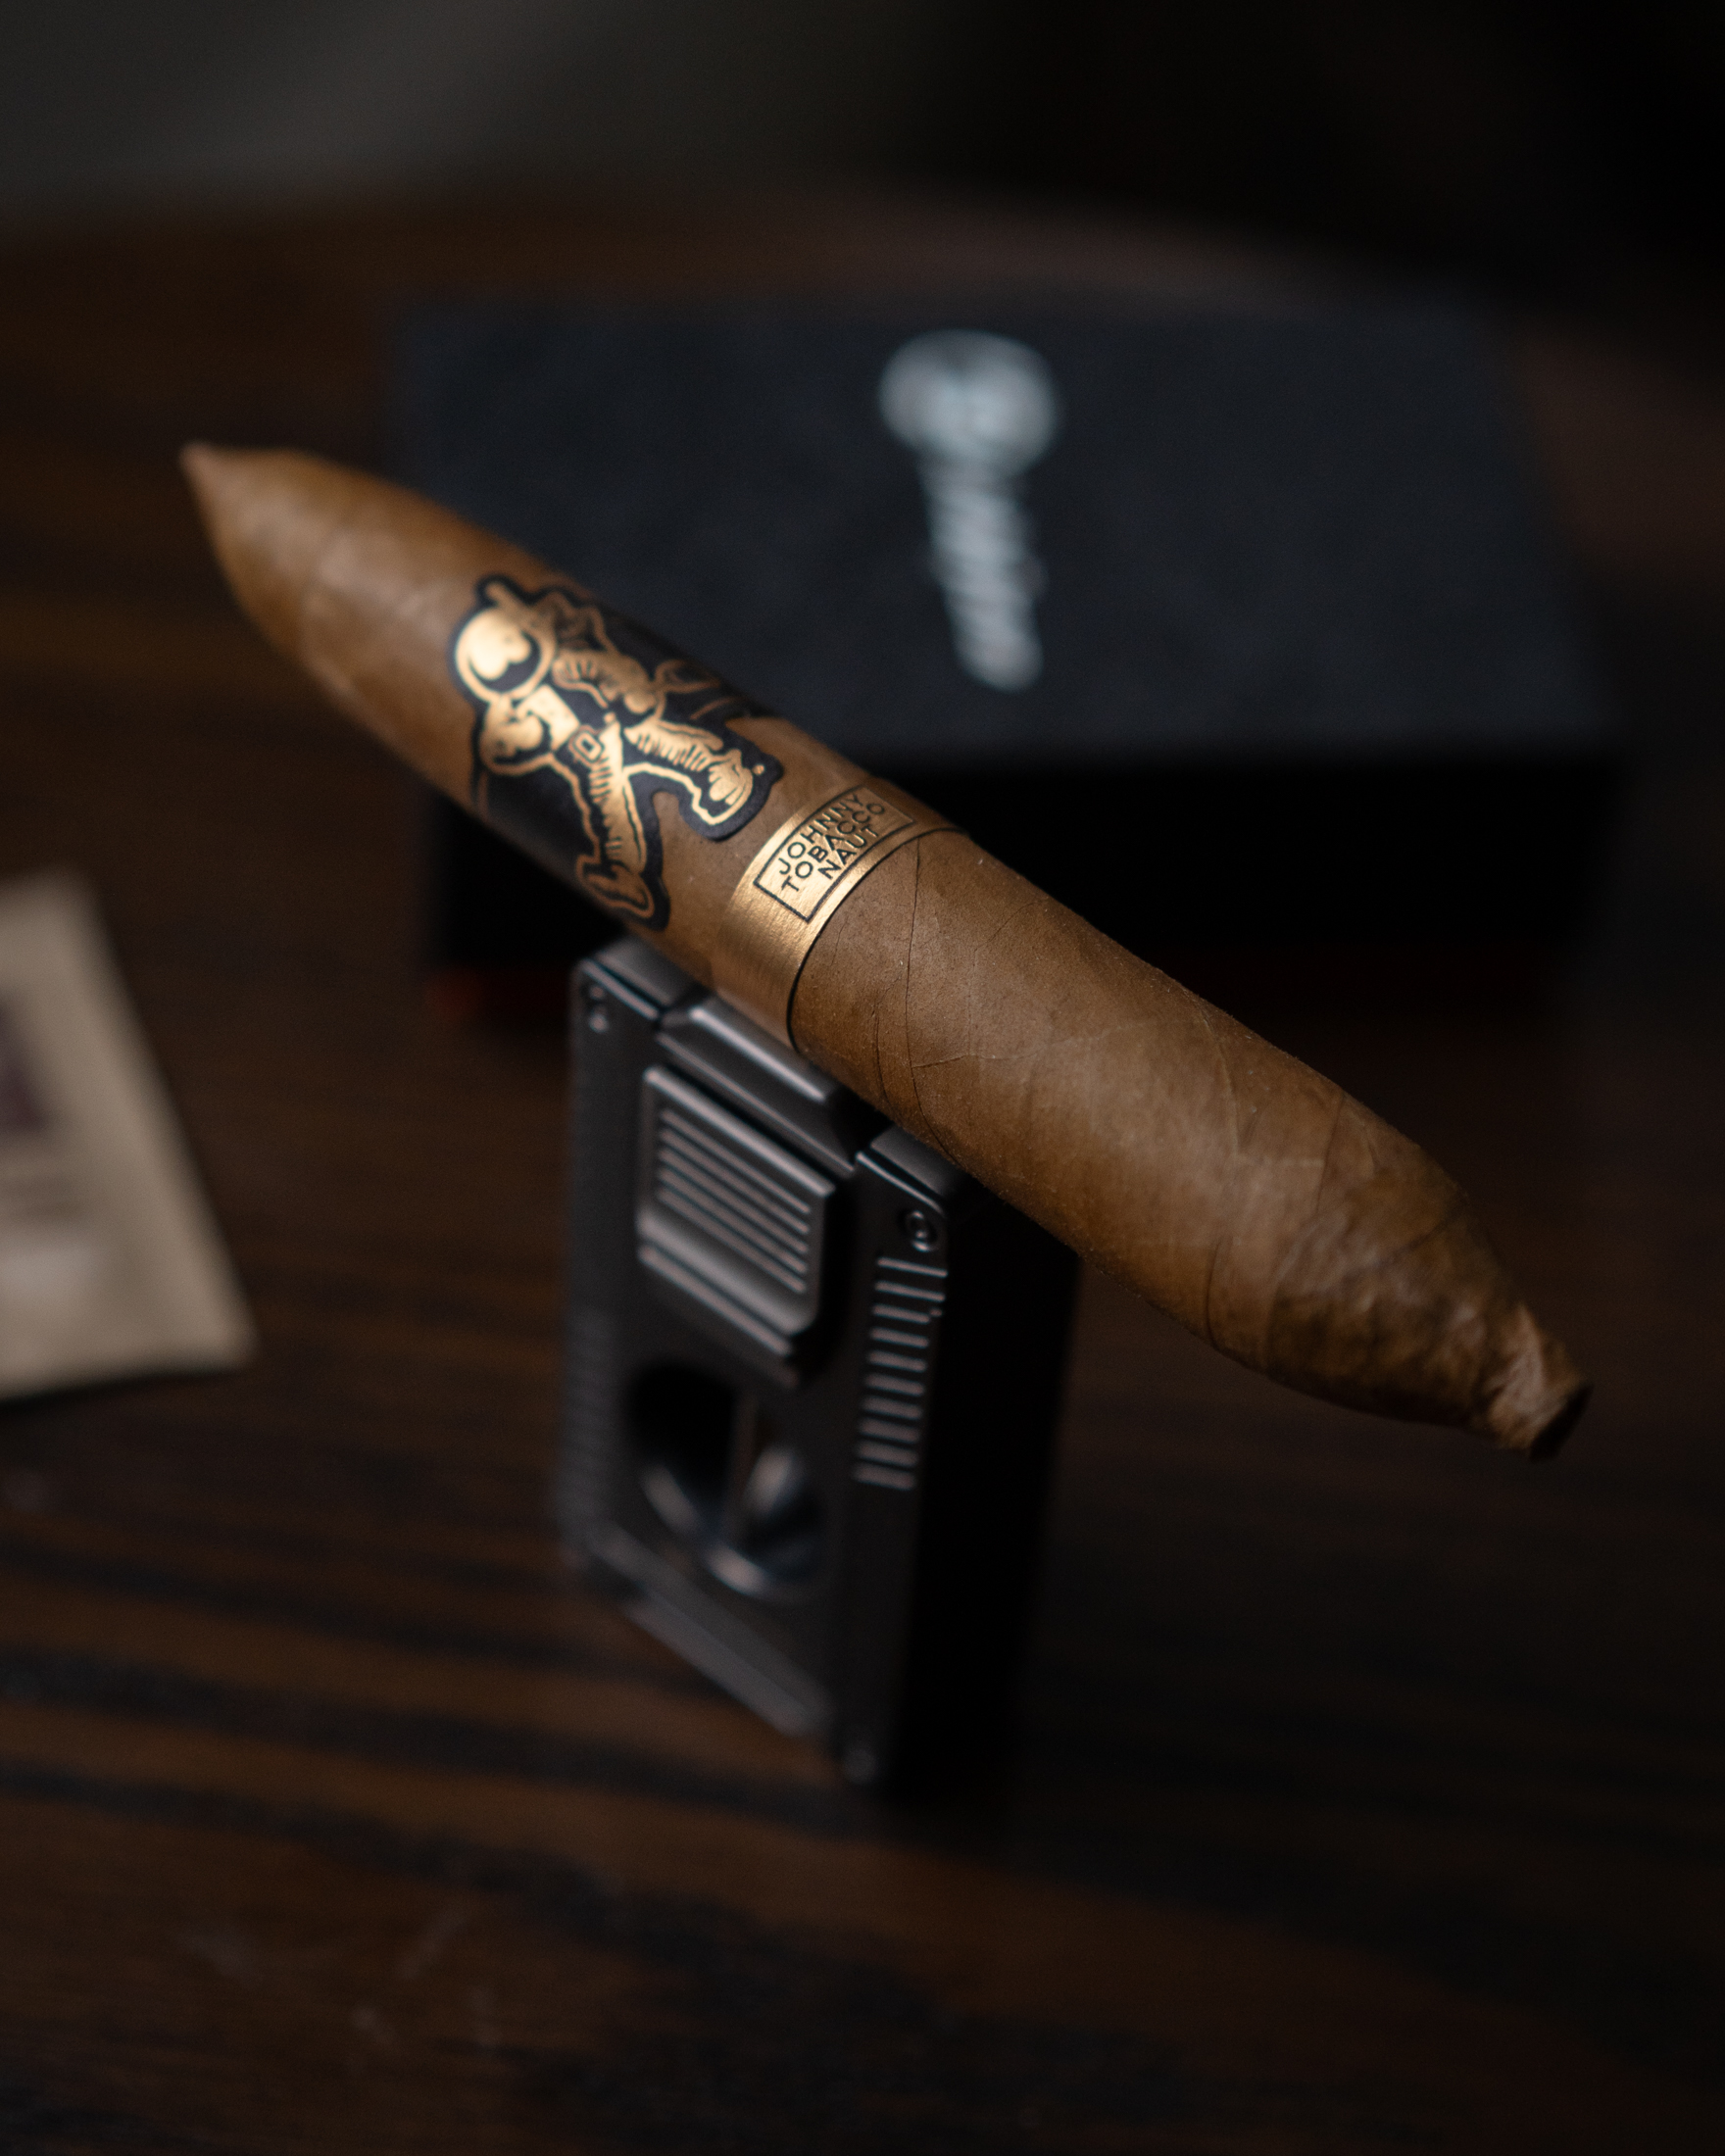 Review  XIFEI Cigar Lighter with Punch 